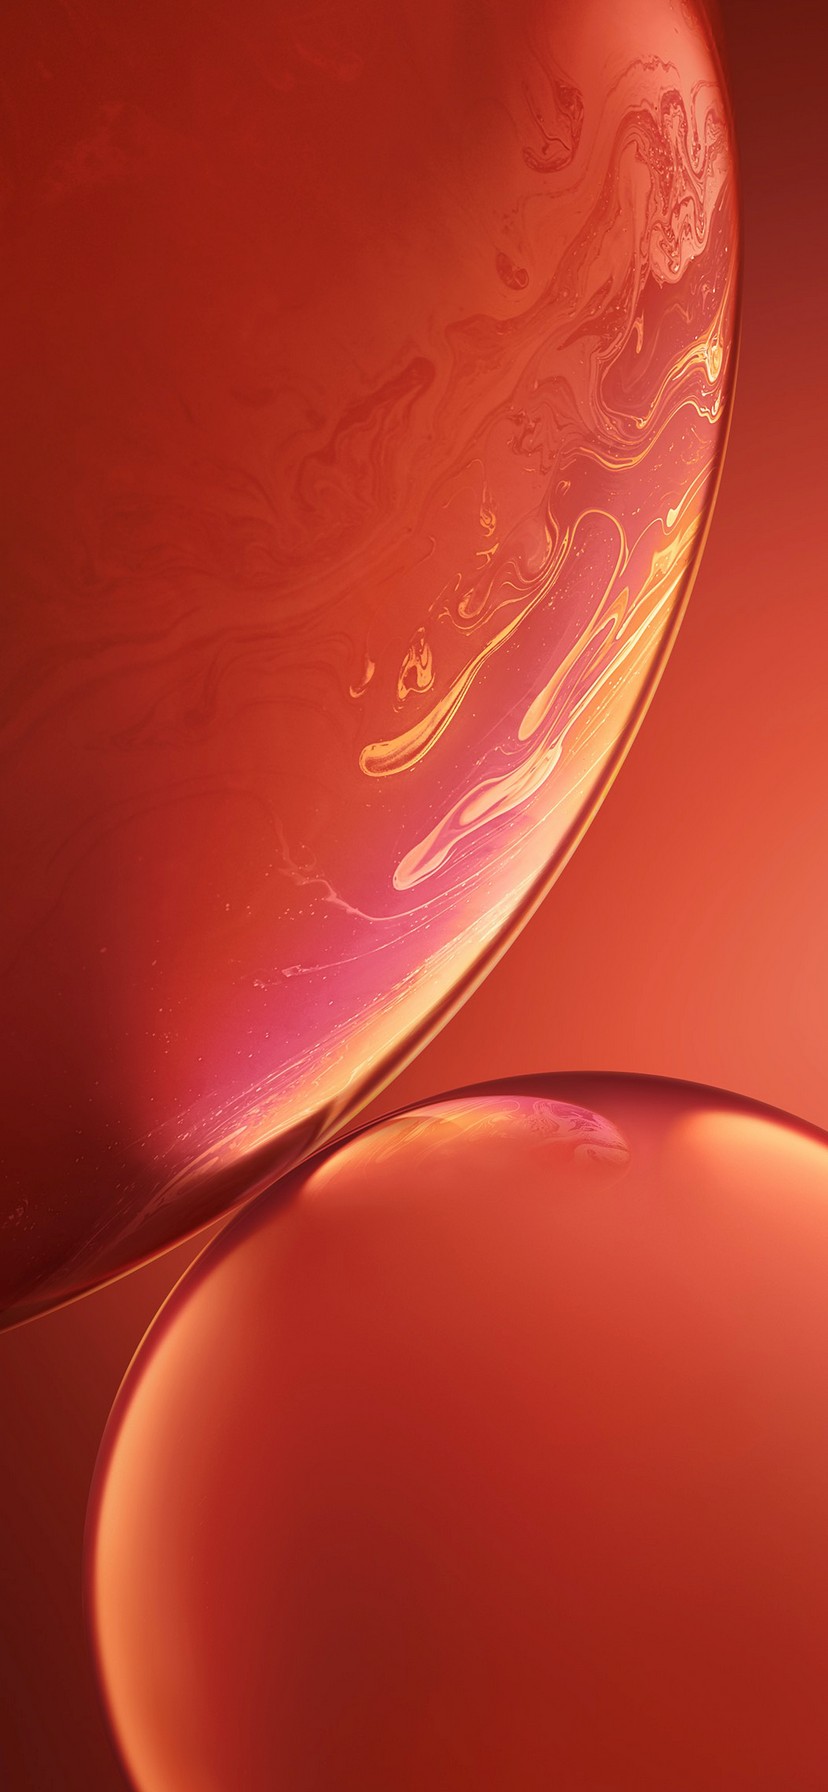 iPhone XR Screen Wallpaper with high-resolution 828x1792 pixel. You can set as wallpaper for Apple iPhone X, XS Max, XR, 8, 7, 6, SE, iPad. Enjoy and share your favorite HD wallpapers and background images